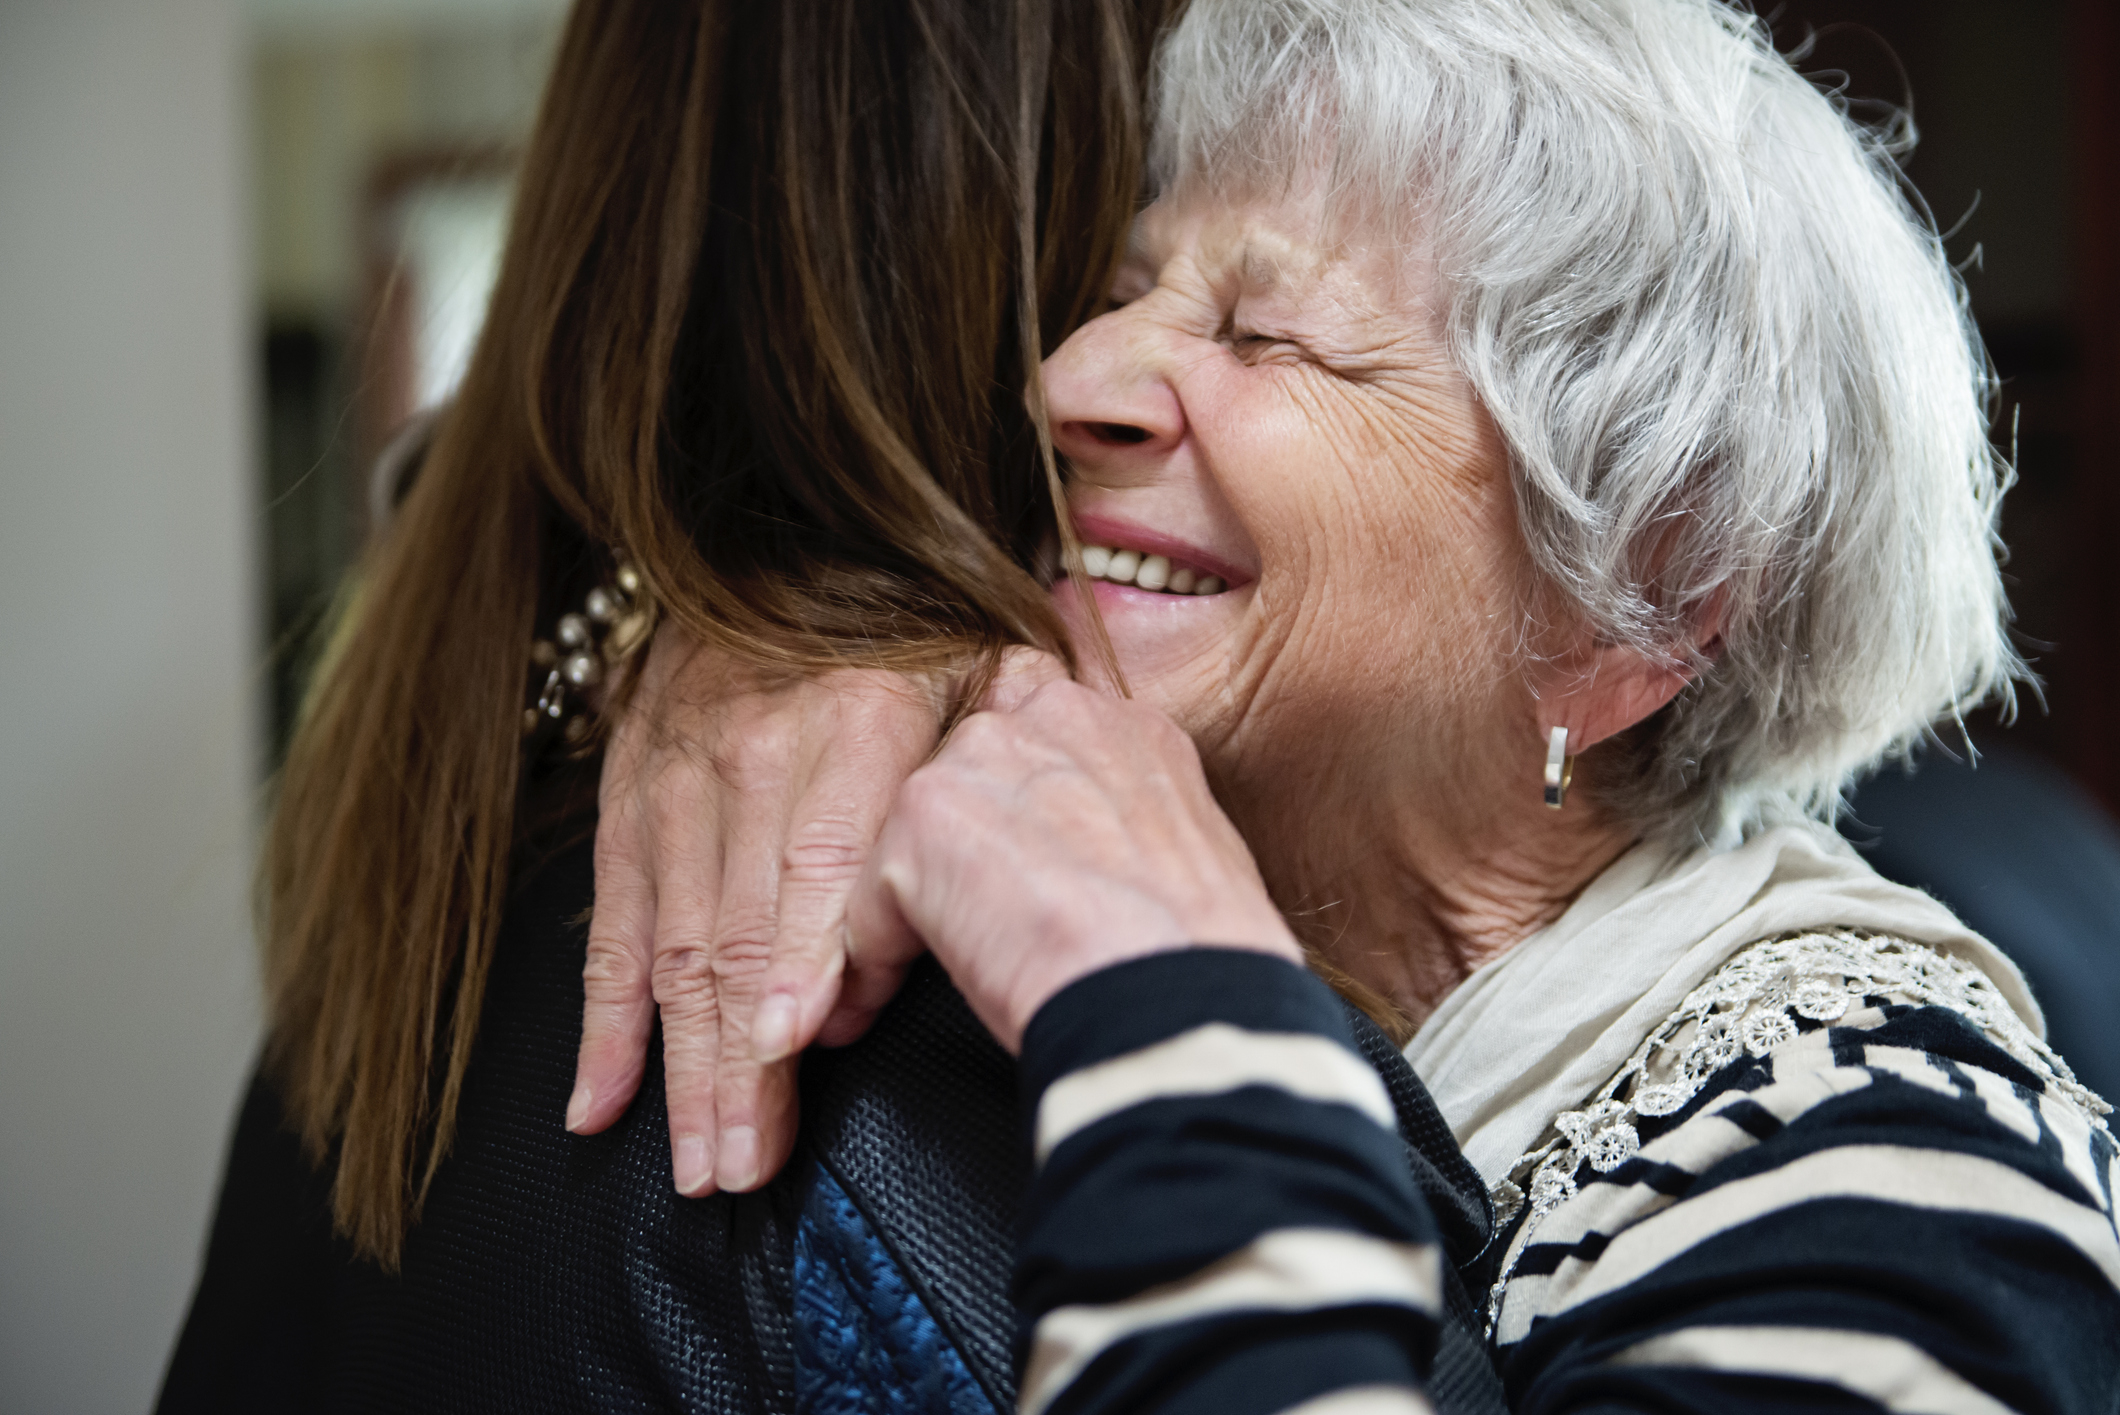 Elderly woman embracing a younger woman, both smiling, conveying a warm, familial bond